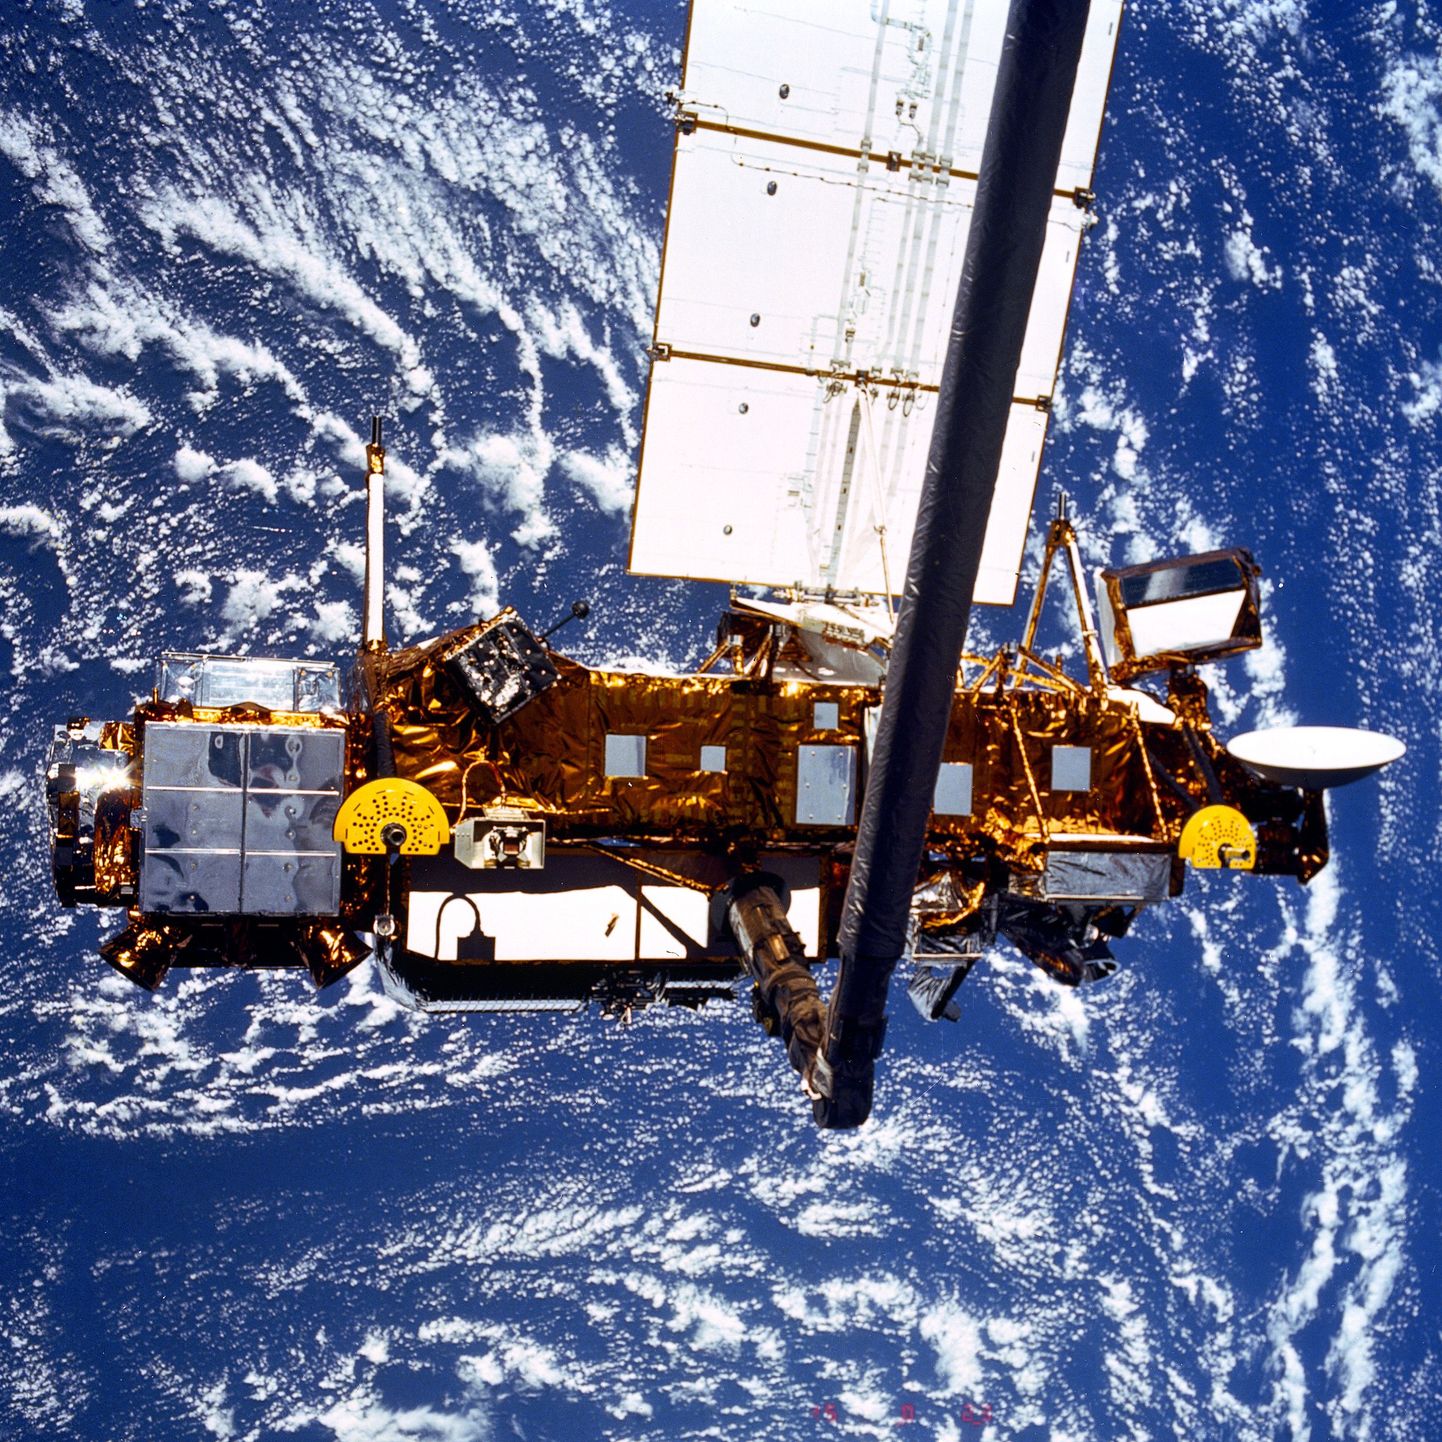 The Upper Atmosphere Research Satellite (UARS)